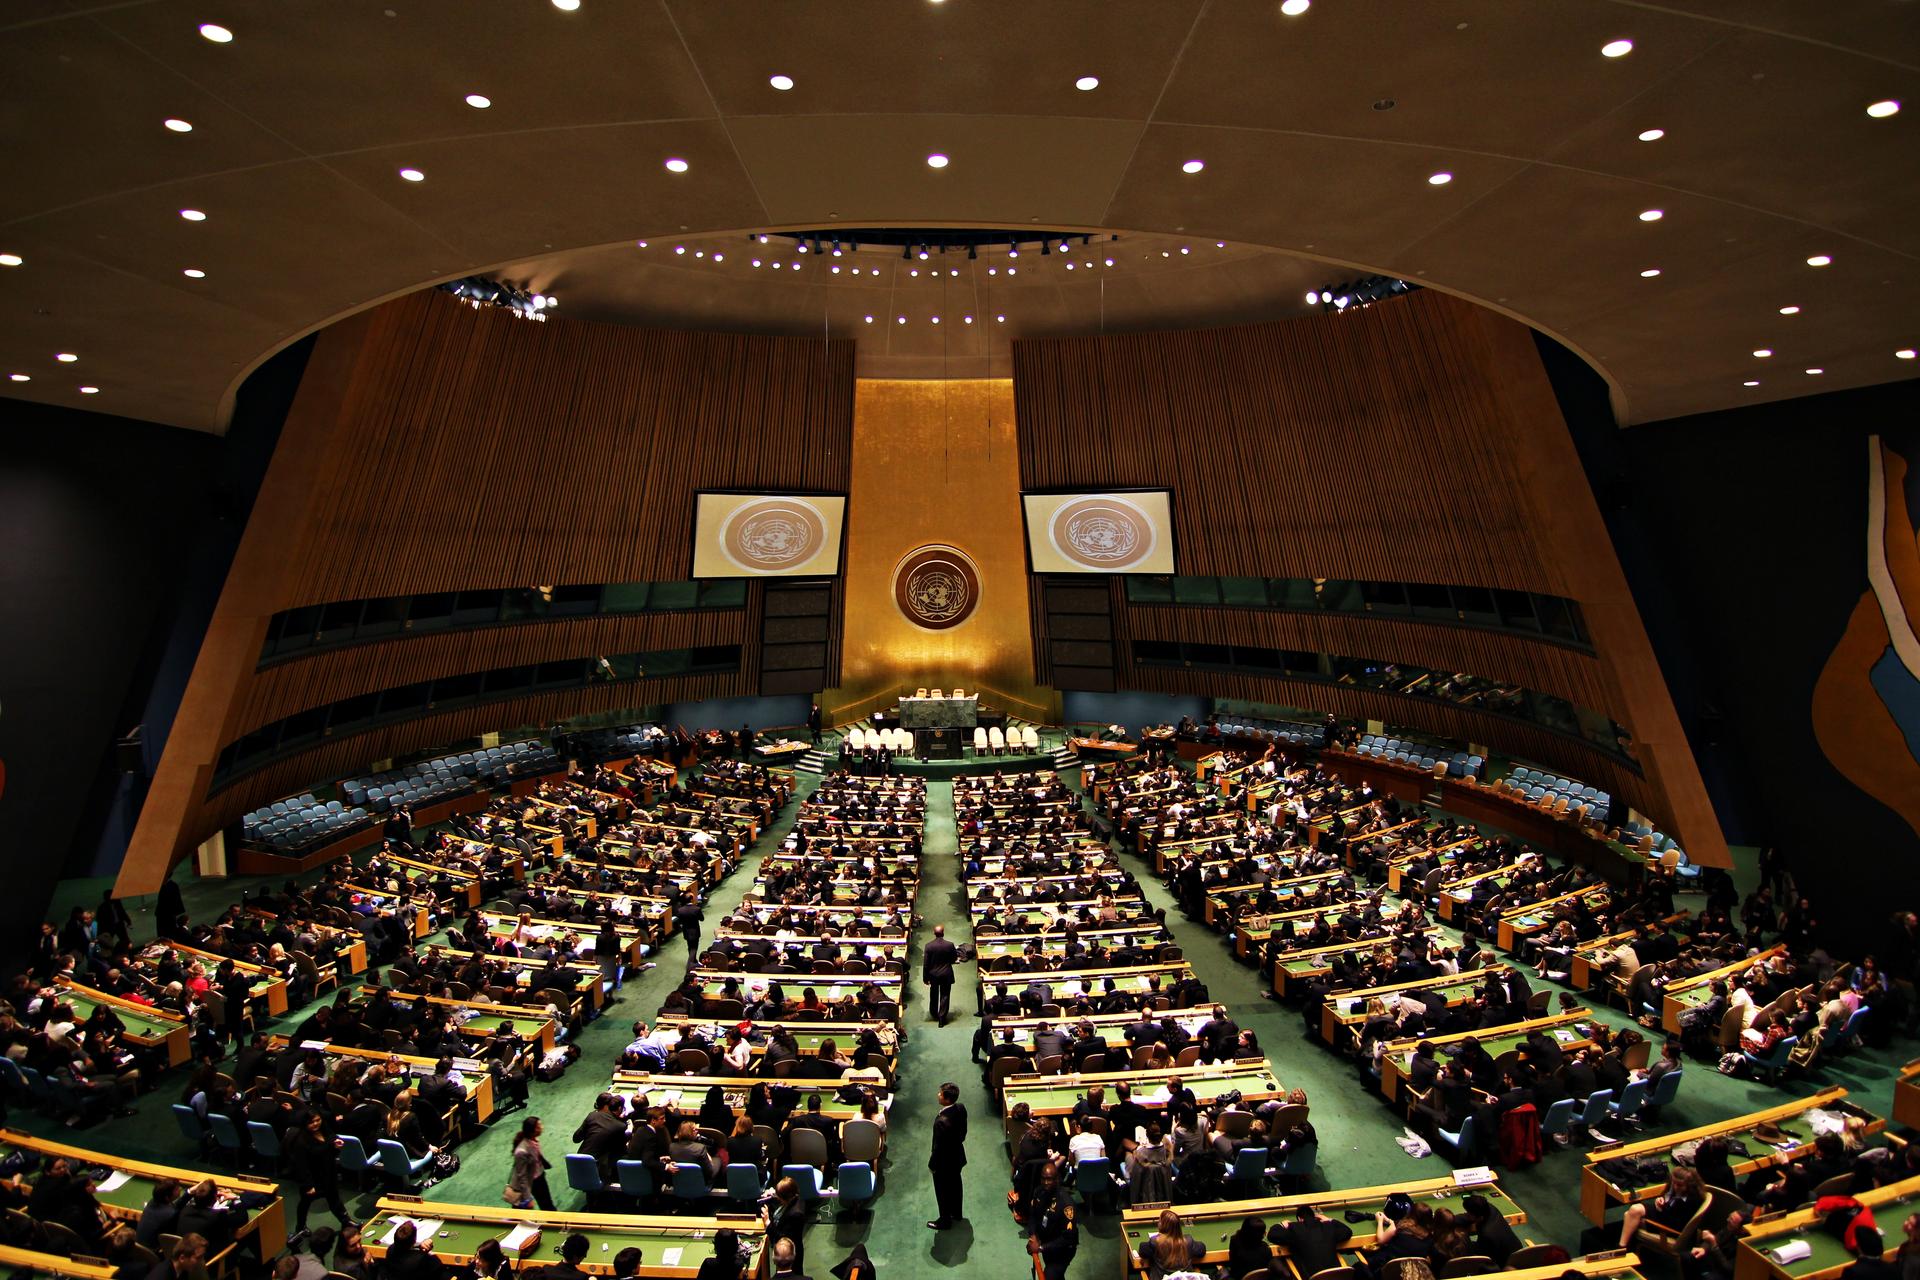 Current actions in space are governed by the 1967 Outer Space Treaty that was developed within the United Nations, seen here.